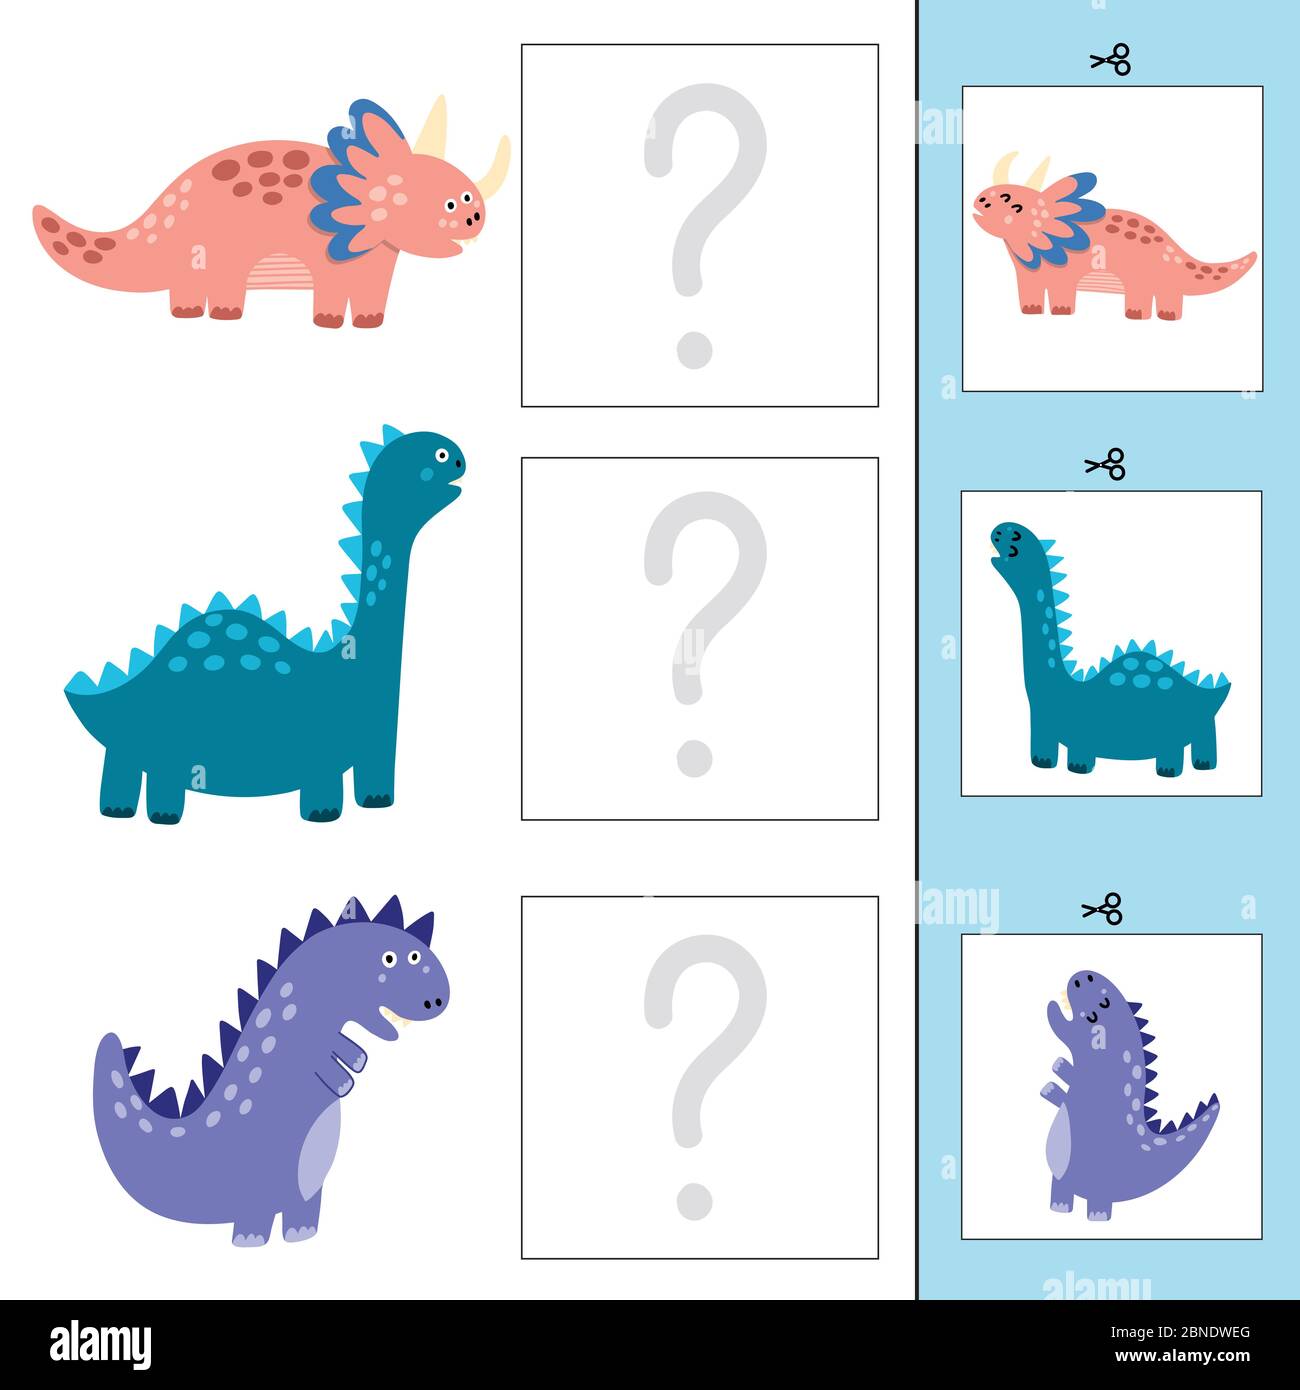 Match baby dinos to mothers. Matching game for toddlers Stock Vector